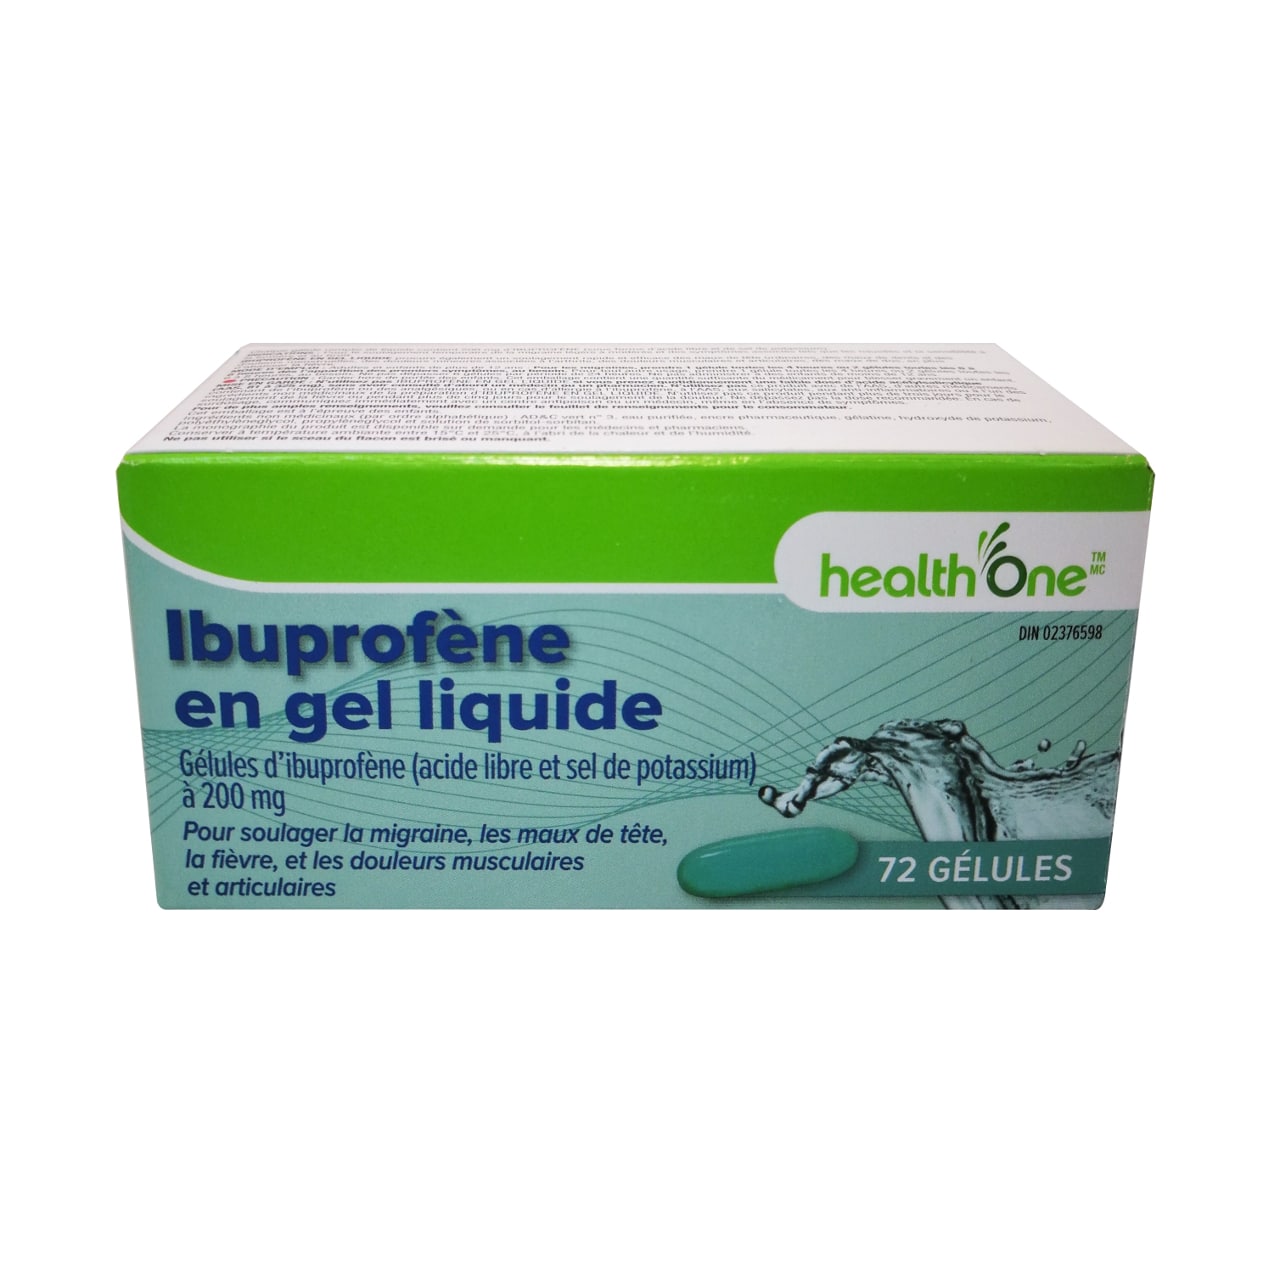 Product label for health One Ibuprofen 200mg in French